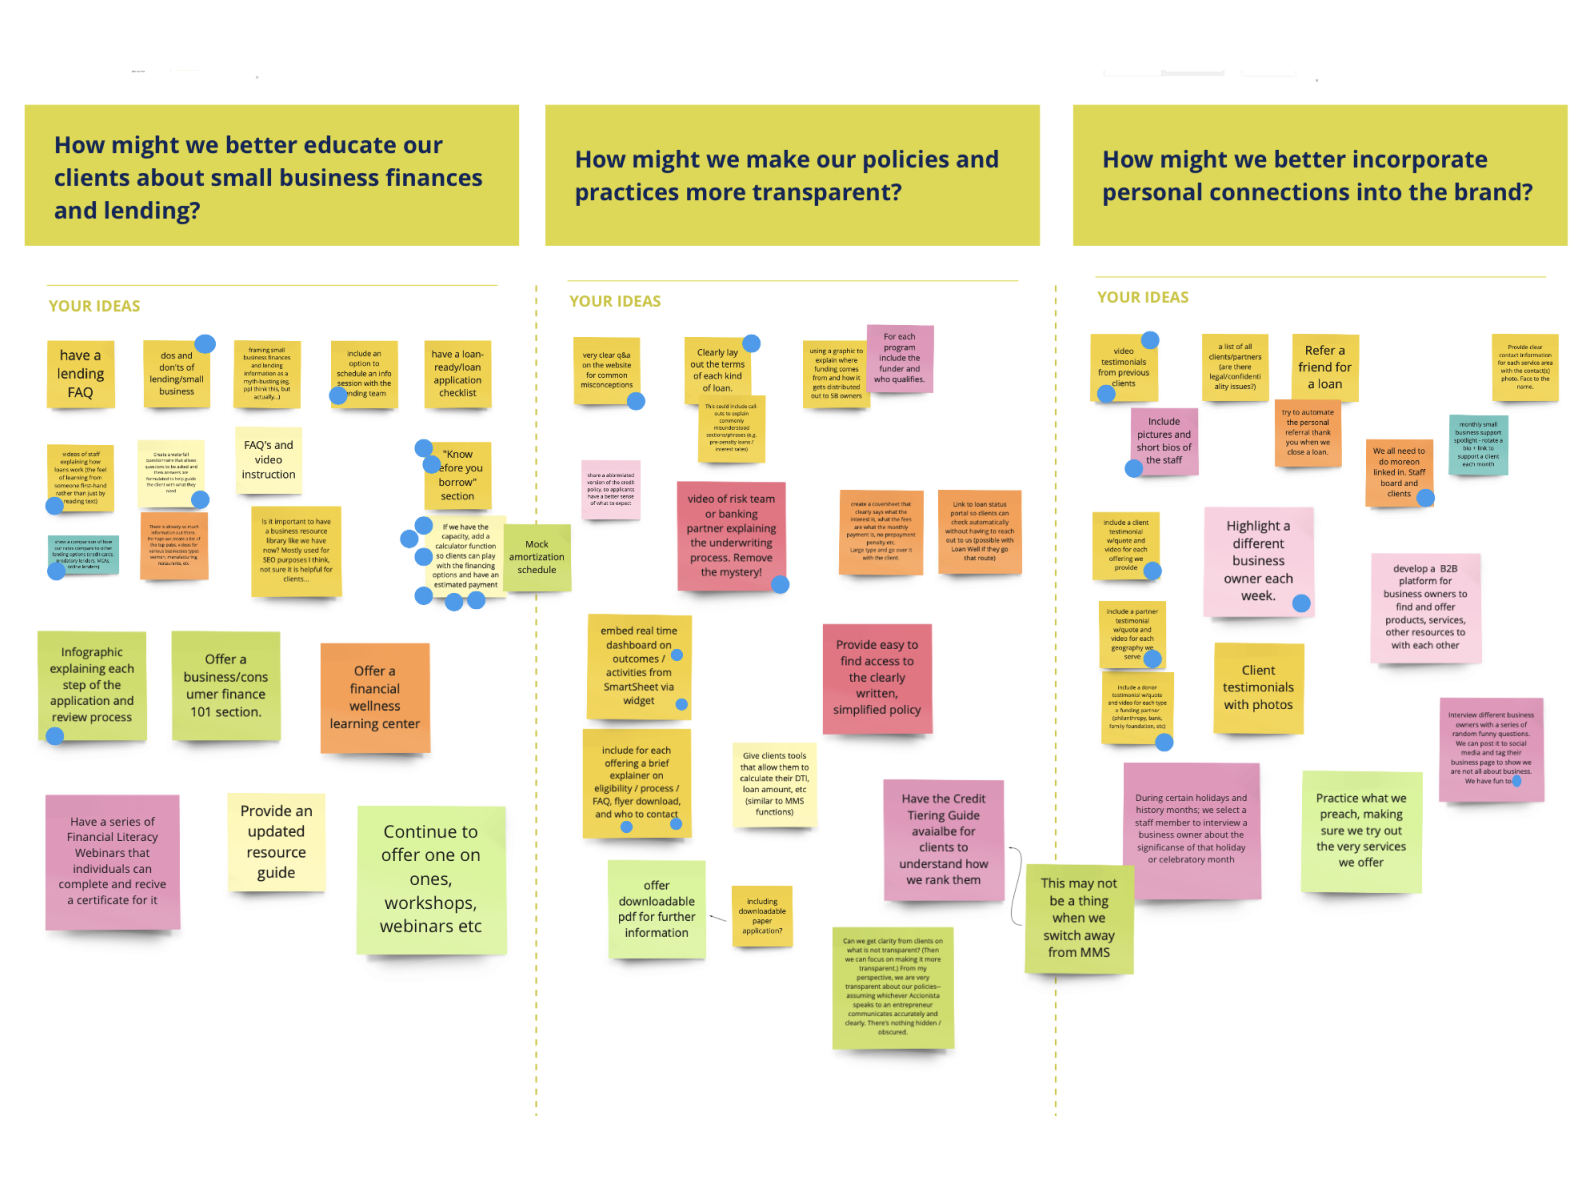 a large chartreuse rectangle with the words "How might we better incorporate personal connections into the brand?" Below it, about 10 "post-its" with different ideas typed on them